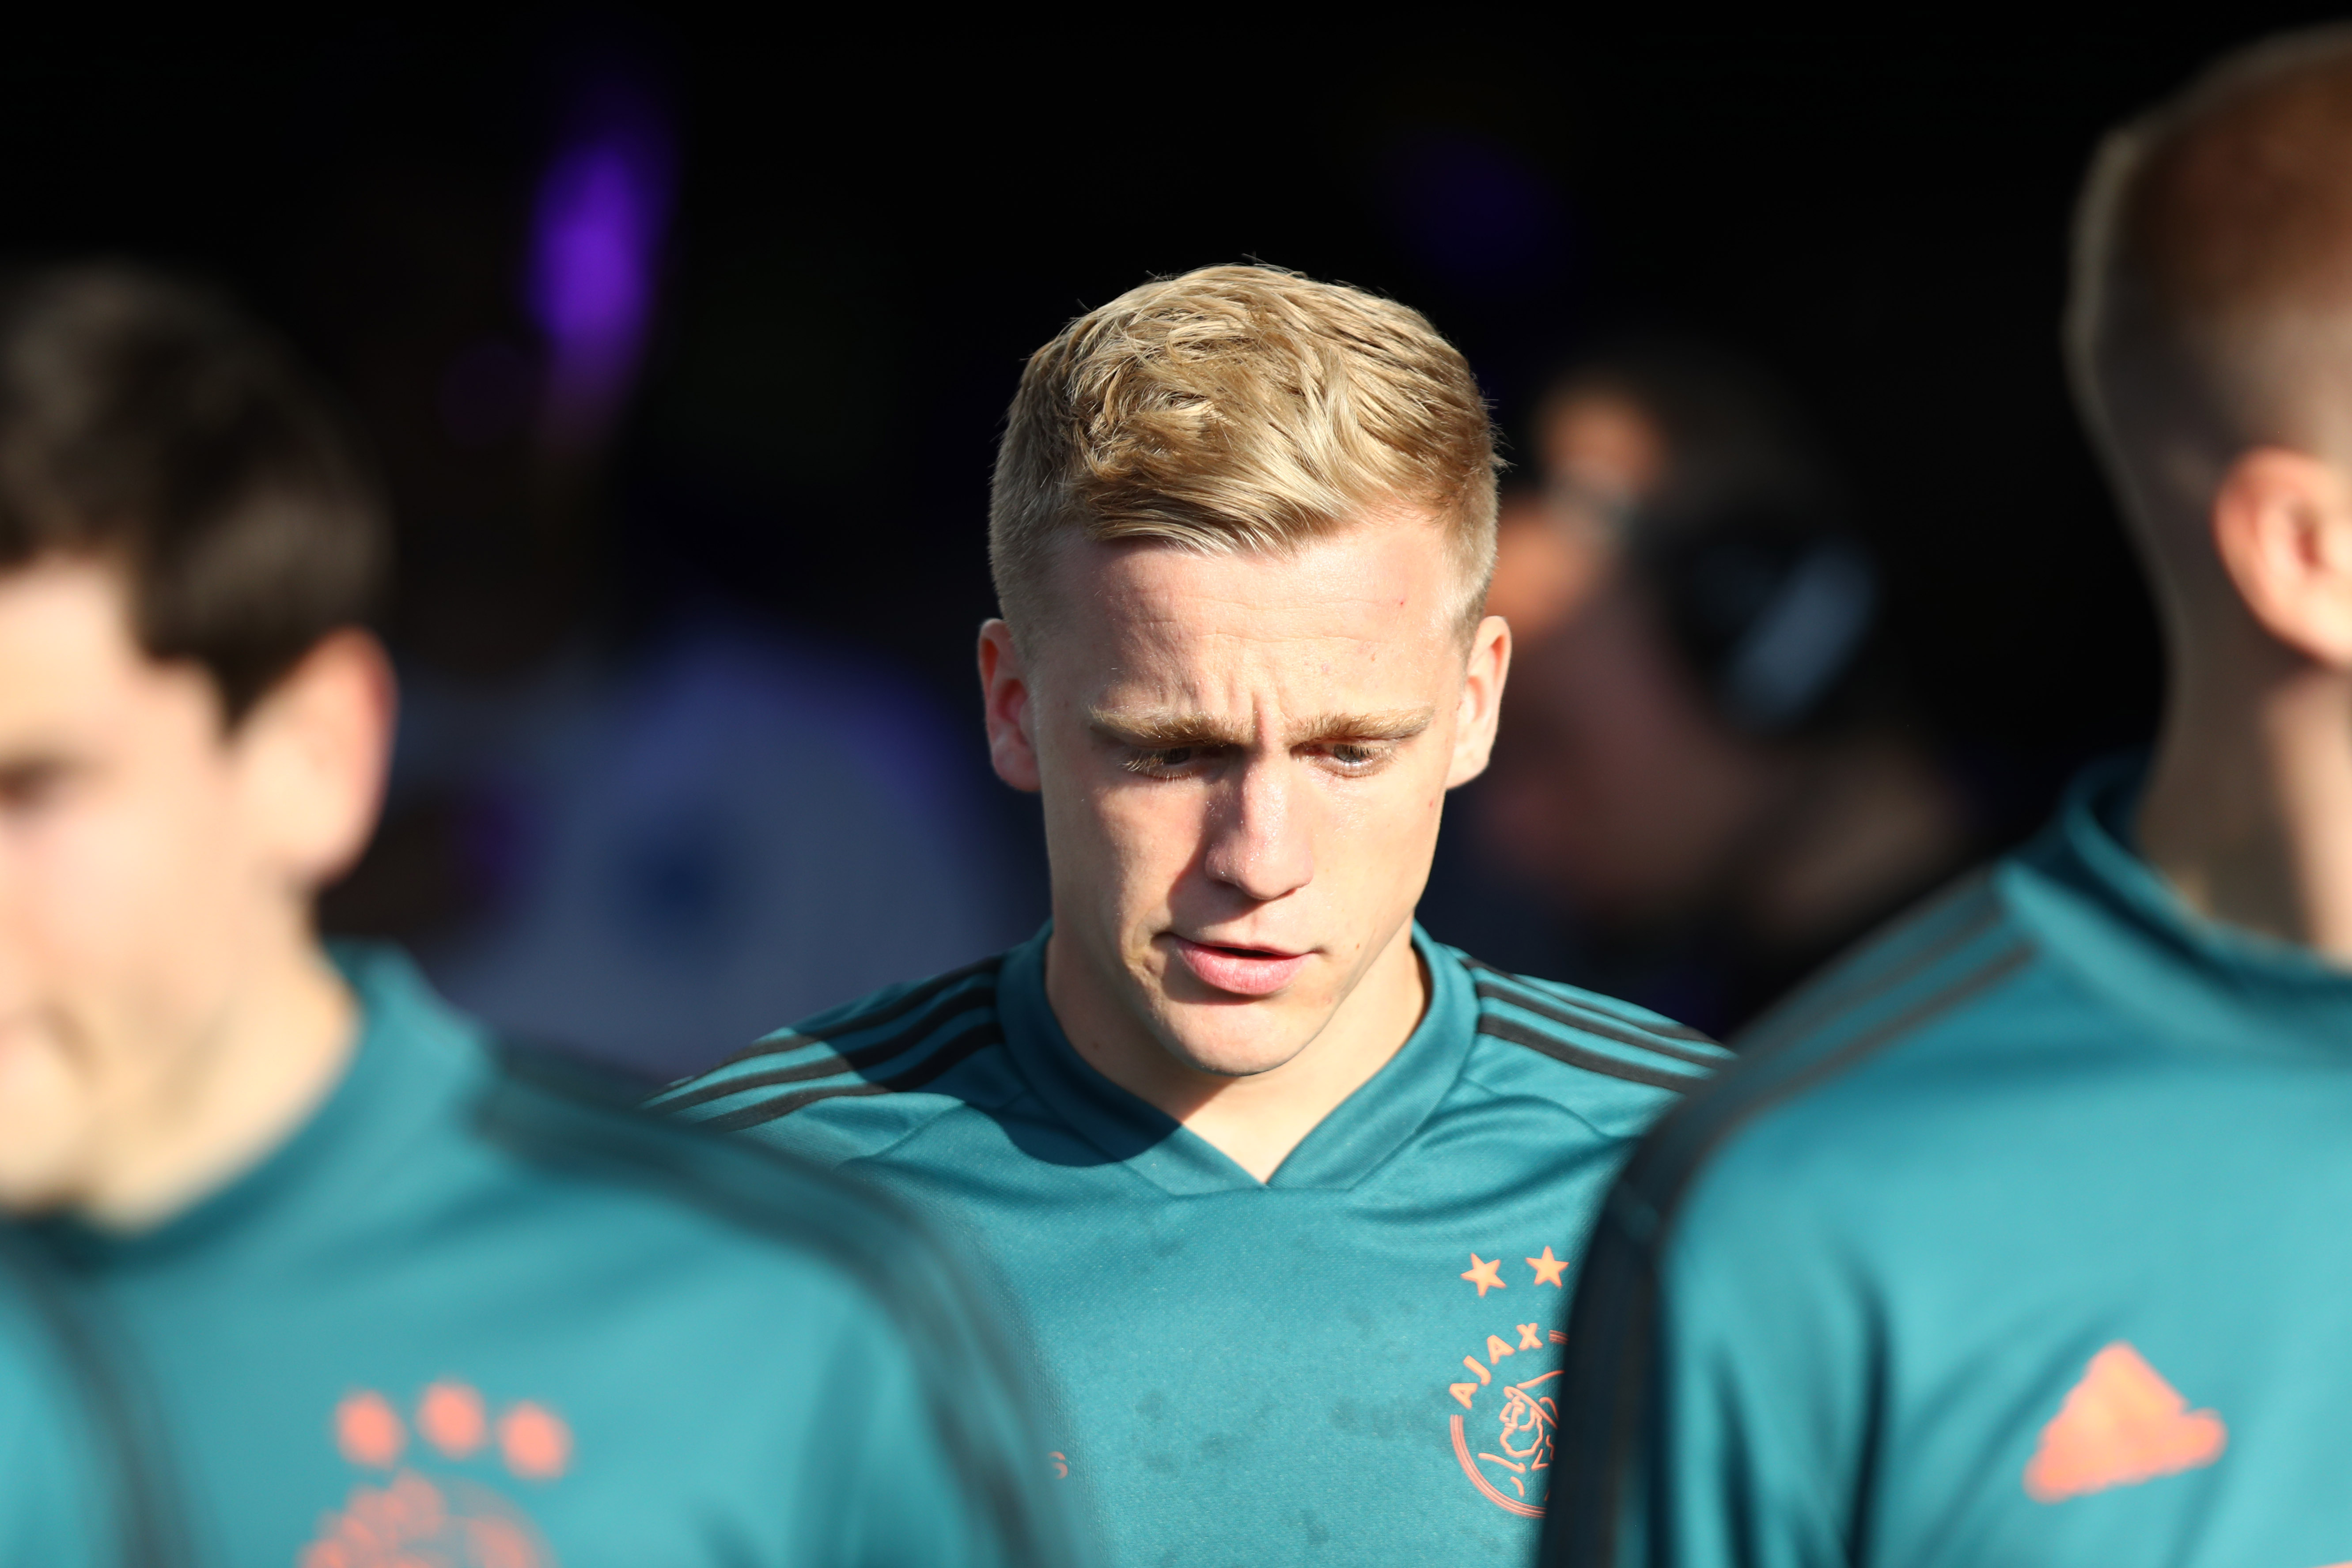 DOETINCHEM, NETHERLANDS - MAY 15: Donny van de Beek of Ajax walks out on the pitch prior to the Eredivisie match between De Graafschap and Ajax at Stadion De Vijverberg on May 15, 2019 in Doetinchem, Netherlands. (Photo by Dean Mouhtaropoulos/Getty Images)